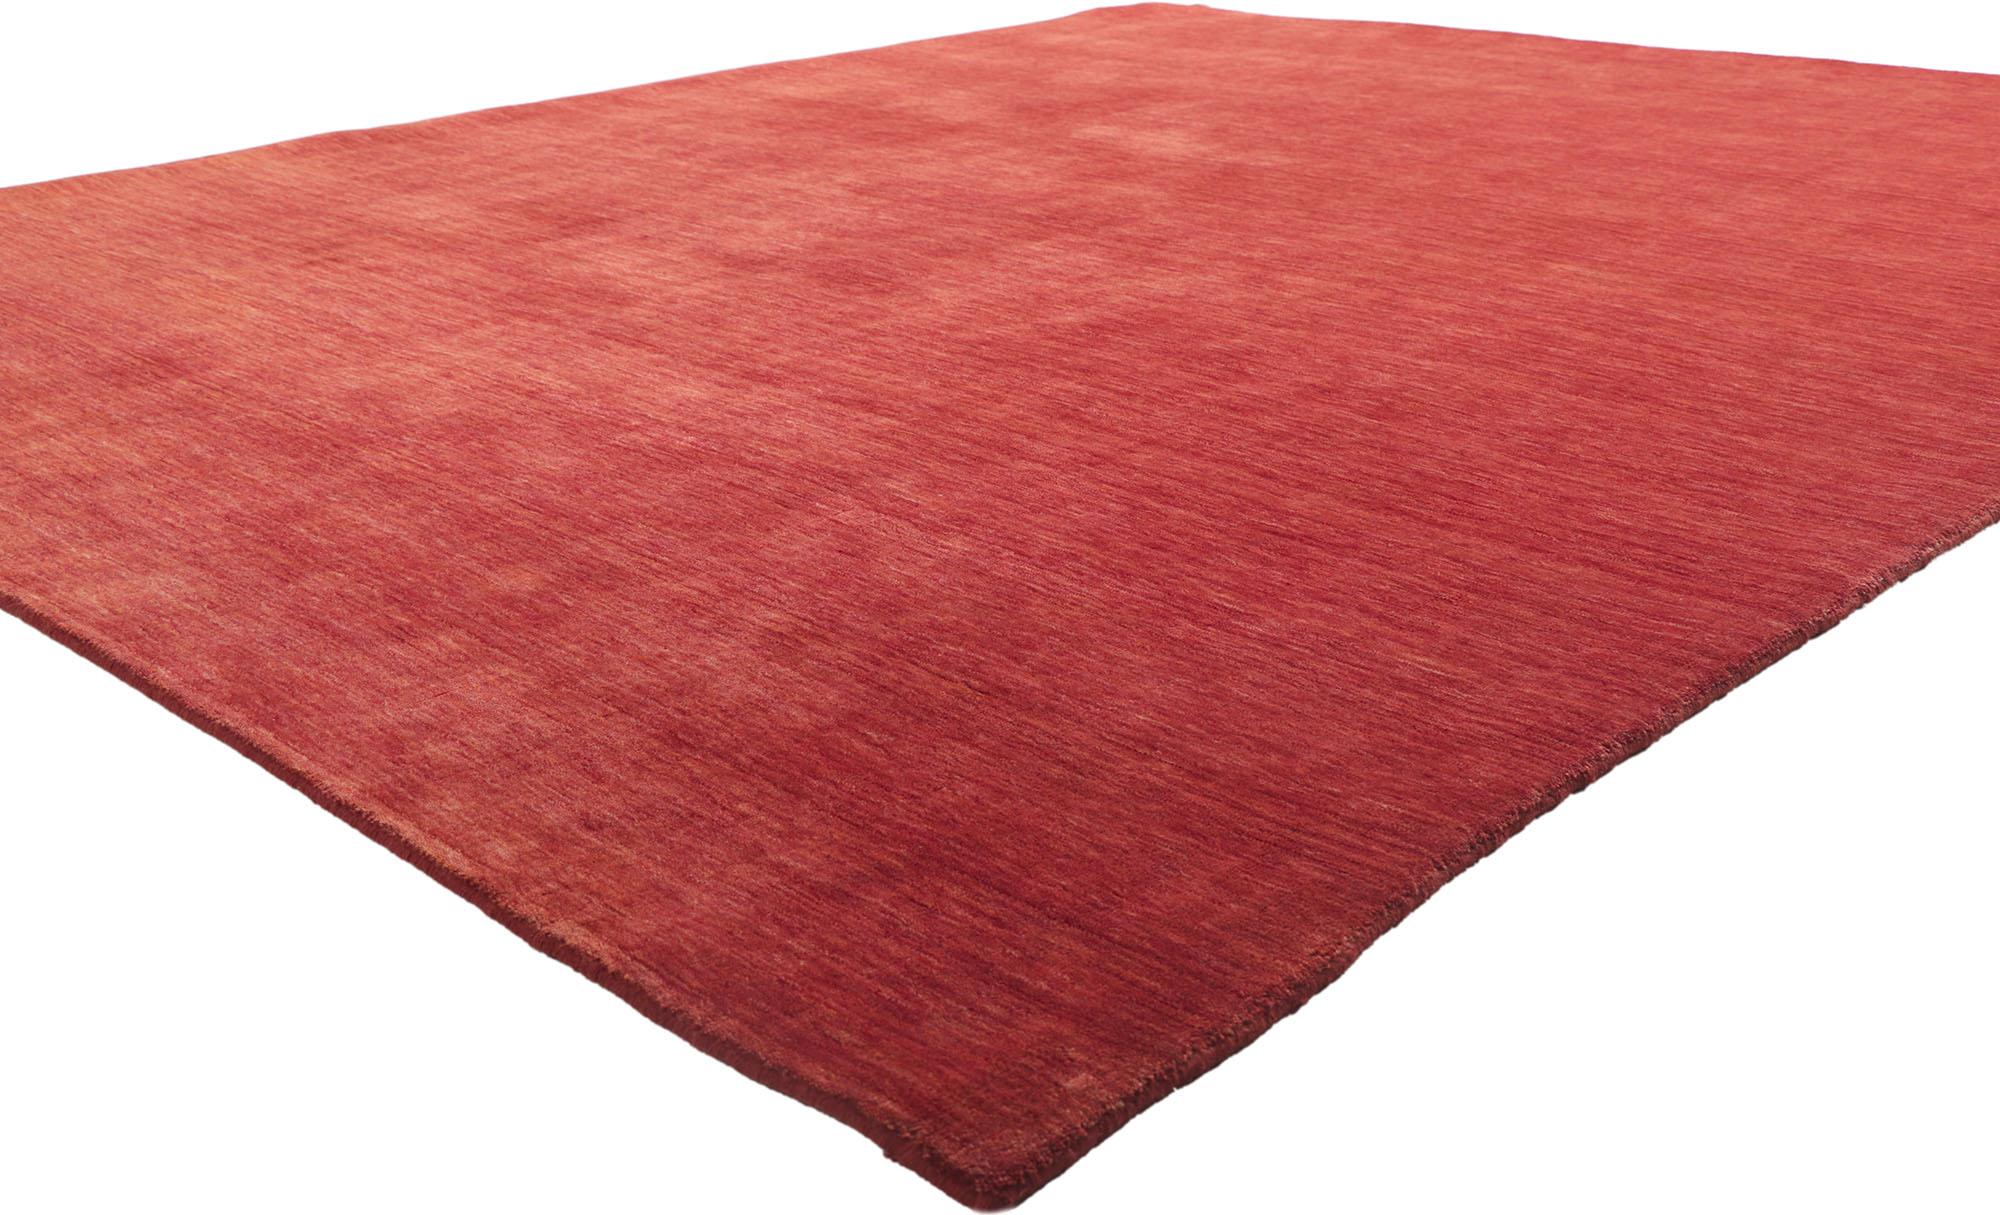 30729 New Contemporary Red Area Rug with Modern Style 08'04 x 10'00. Effortless, elegant, and casual meets the eye in this contemporary Indian area rug. It features gorgeous red hues and softly gradated striations running selvage to selvage blending